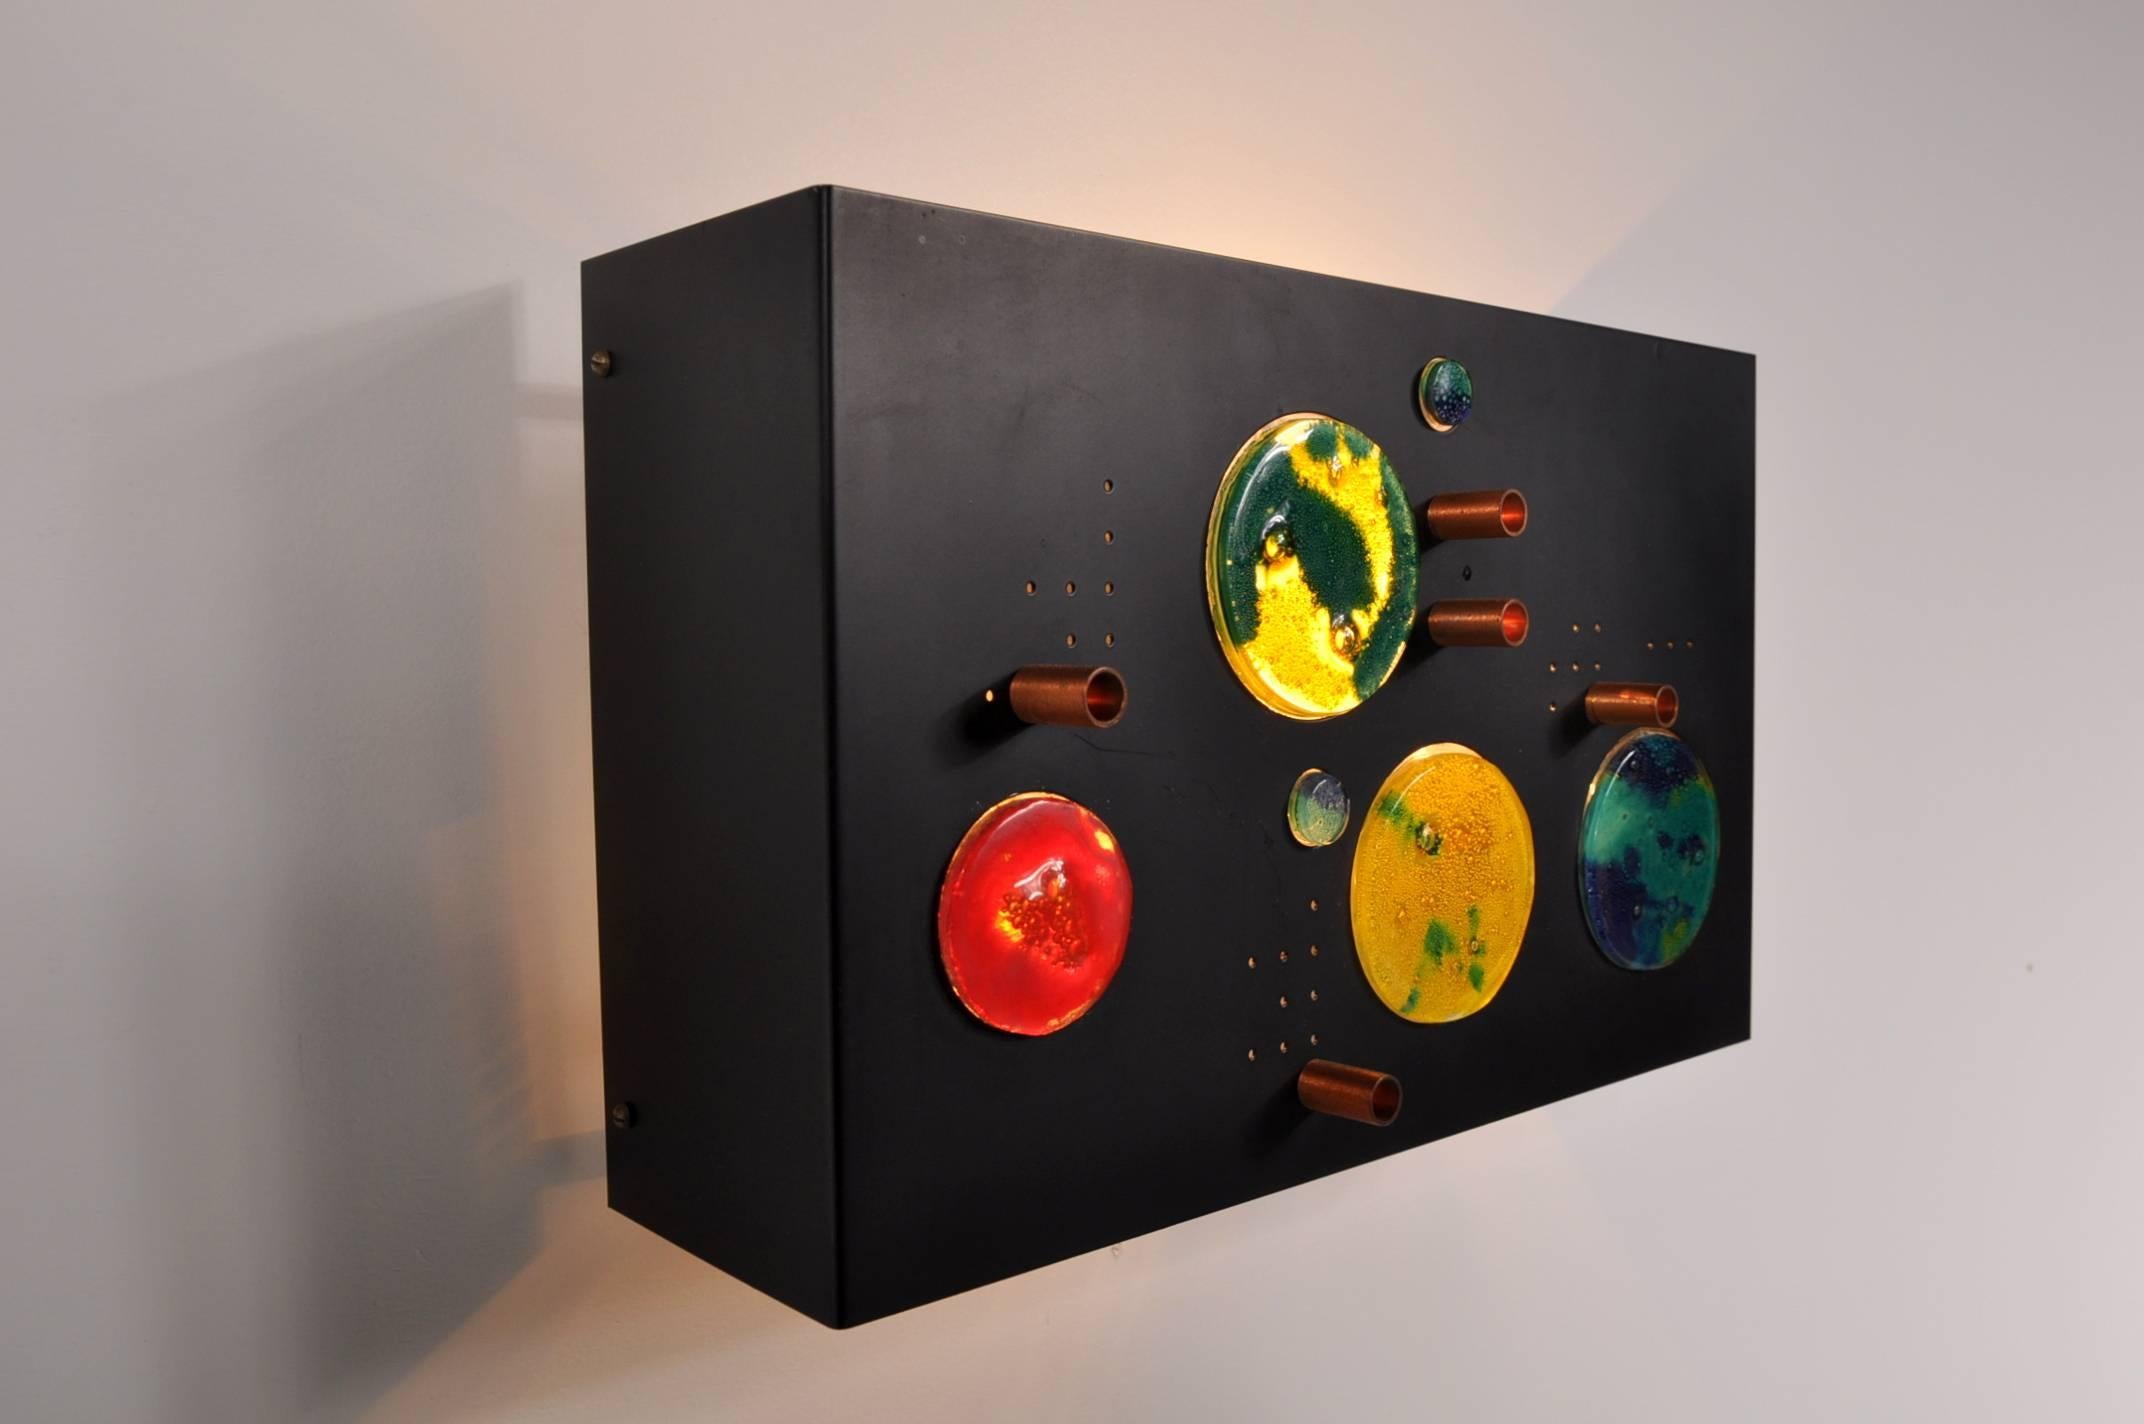 Stunning Collage wall light by Willem van Oyen, manufactured by RAAK in the Netherlands around 1960.

The piece is made of high quality metal with beautiful glass inclusions, uniquely shaped like different planets. The tubes are made of copper, all